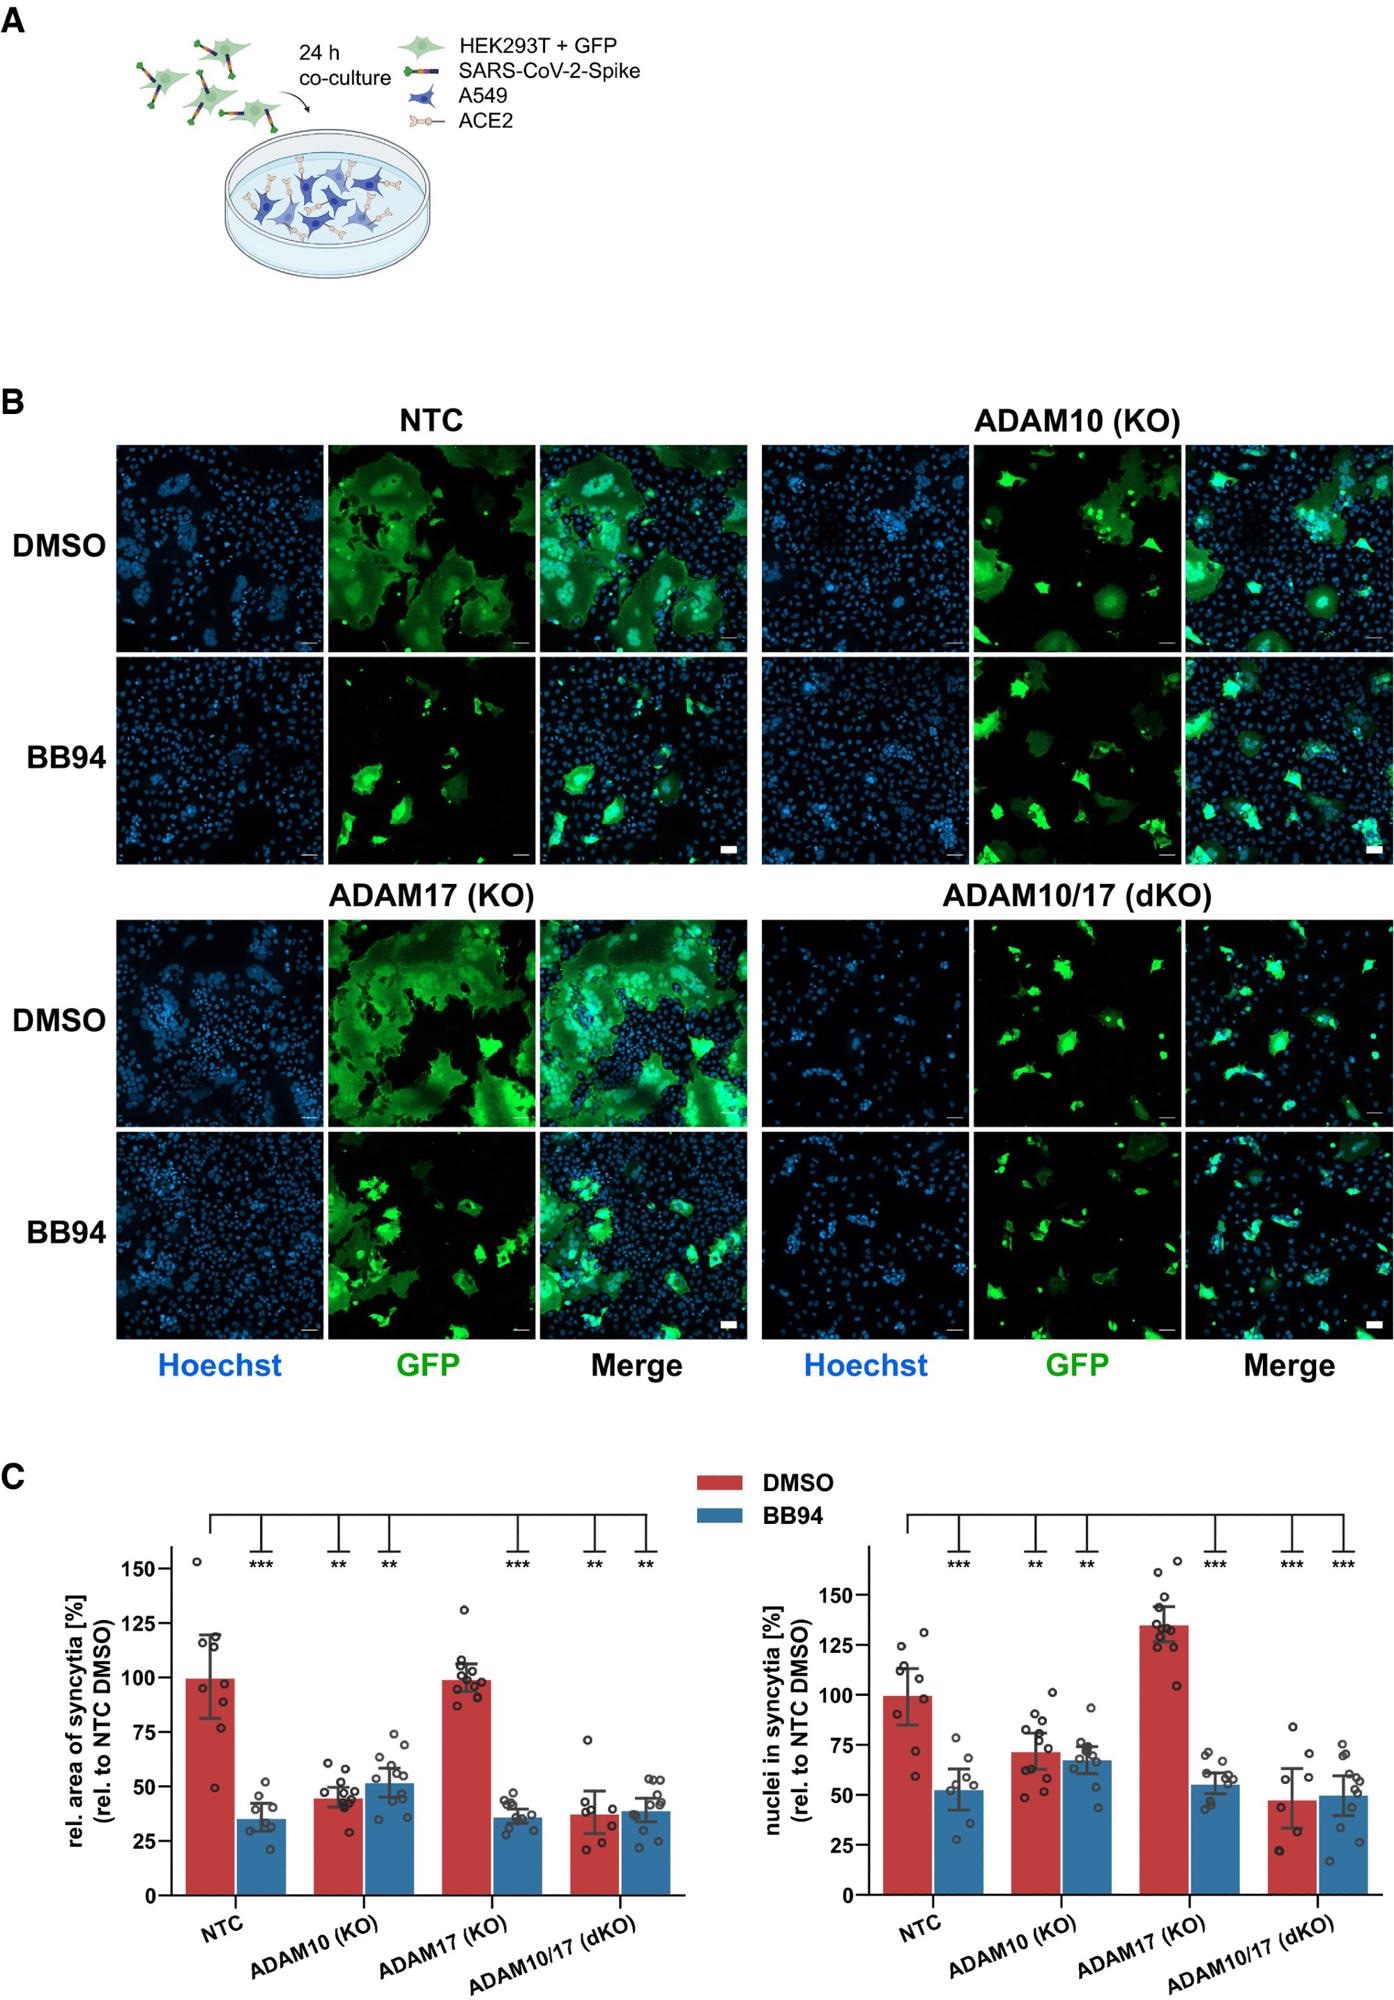 ADAM10 is required for lung cell syncytia formation Experimental scheme of syncytia formation assay. Donor cells (HEK293T) co-expressing the SARS-CoV-2 spike protein along with GFP were co-cultured with A549-ACE2 NTC or KO acceptor cells. After 24 h, co-cultures were analyzed by confocal microscopy. Representative images of syncytia formation assay. Large syncytia were observed for NTC and ADAM17 KO cells but were strongly reduced when ADAM10 was knocked out, either alone or together with ADAM17 or upon inhibition with BB94 (10 µM). For both ADAMs, the cell lines obtained with gRNA sequence 1 were used. Images show GFP fluorescence and Hoechst staining. Scale bars, 50 µm. Quantification of images from fluorescence microscopy (B). Left plot: the area of the fused cells in green (GFP) was quantified and normalized to the Hoechst signal (blue) of the entire image to account for differences in cell density. Right plot: The nuclei within syncytia were determined by calculating the ratio between the Hoechst signal within syncytia and the total Hoechst signal in the entire image. The data are normalized to NTC DMSO (N ≥ 8). Two-way ANOVA with Tukey’s correction for multiple comparisons. All data are represented as mean ± 95% CI of at least three independent experiments. **P < 0.01, ***P < 0.001. See also Fig EV4.